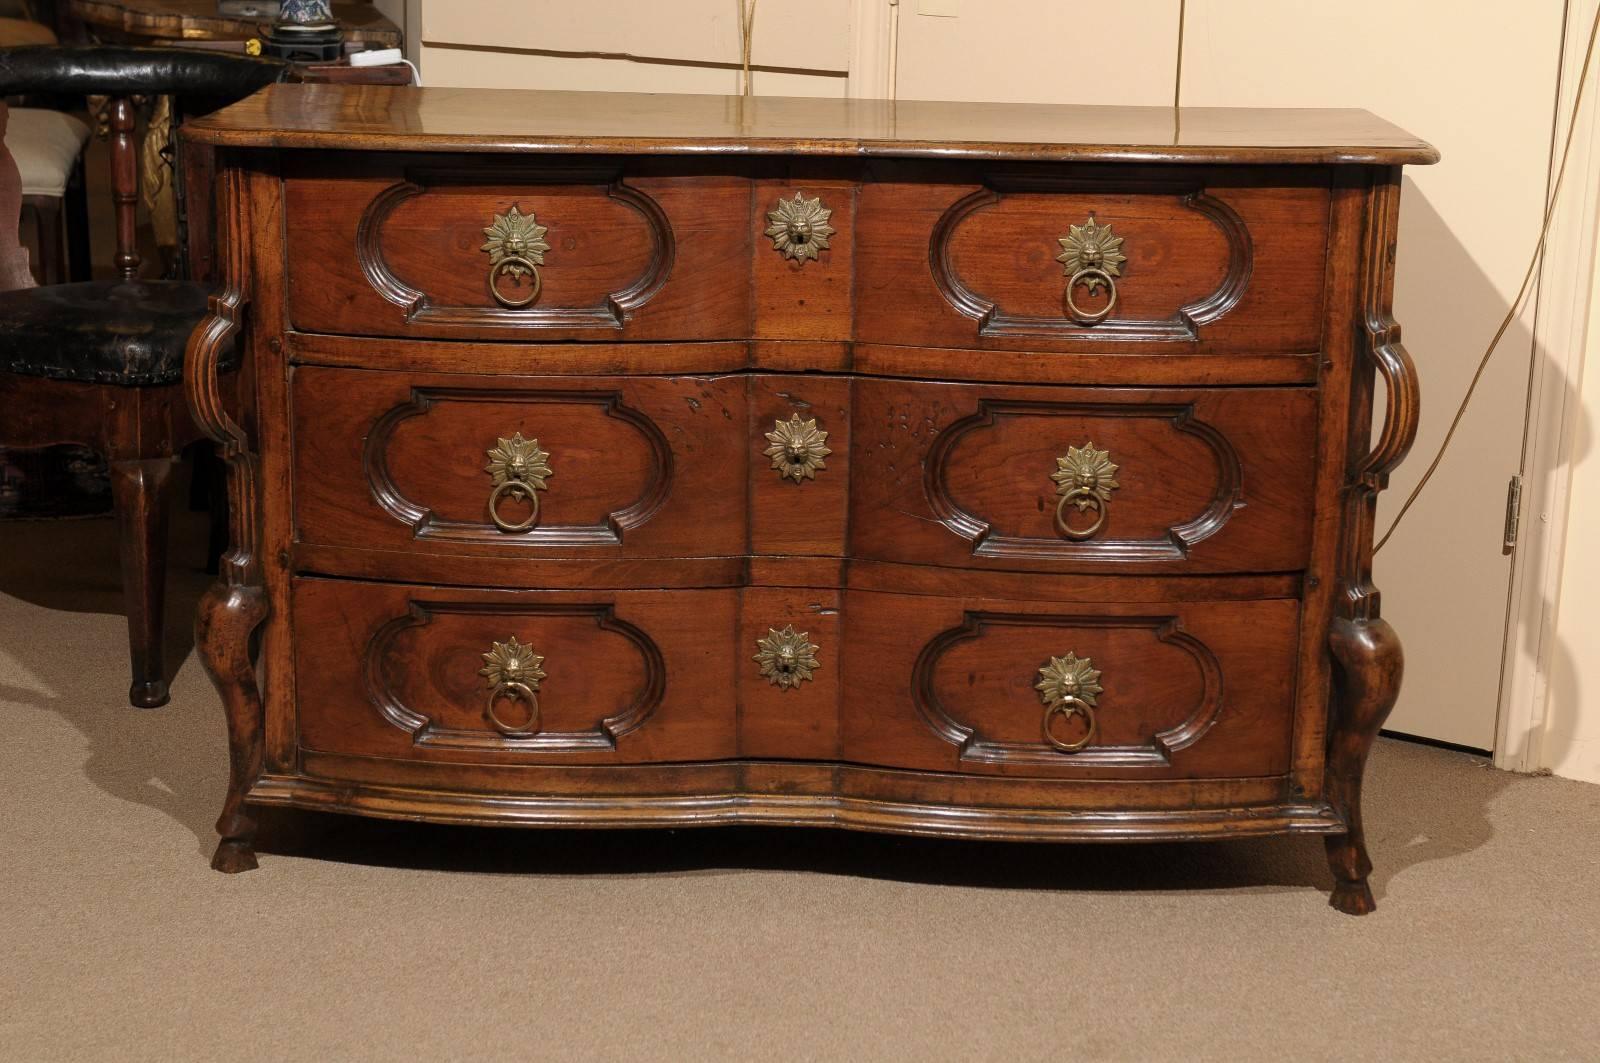 18th century French Louis XIV style walnut commode.